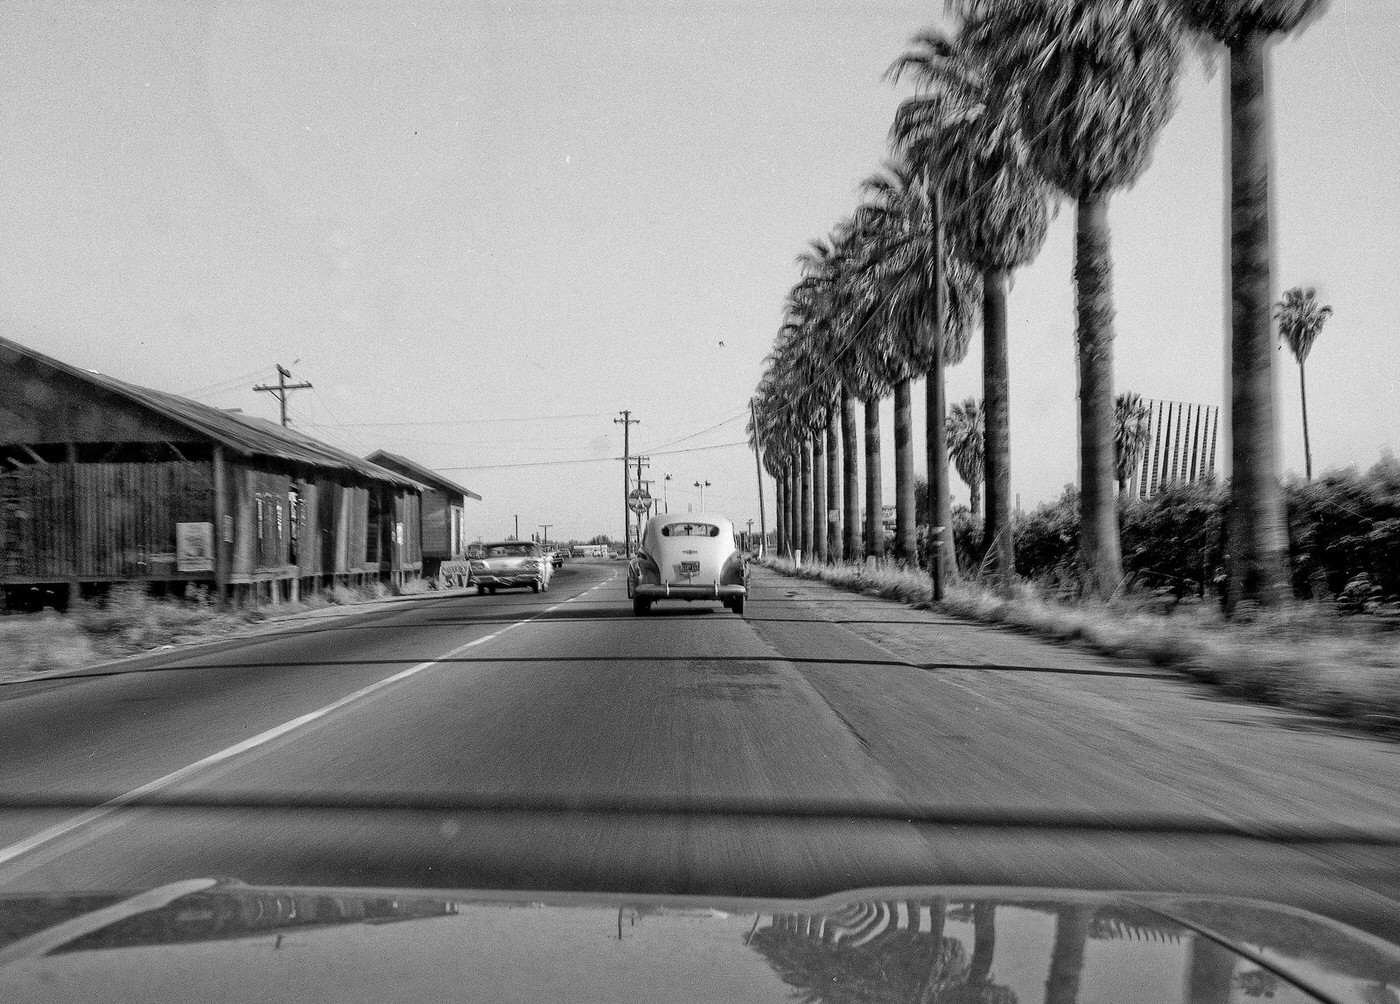 South bound on Clovis Avenue in 1961 about 1/8 mile from the Olive intersection in east Fresno, California.